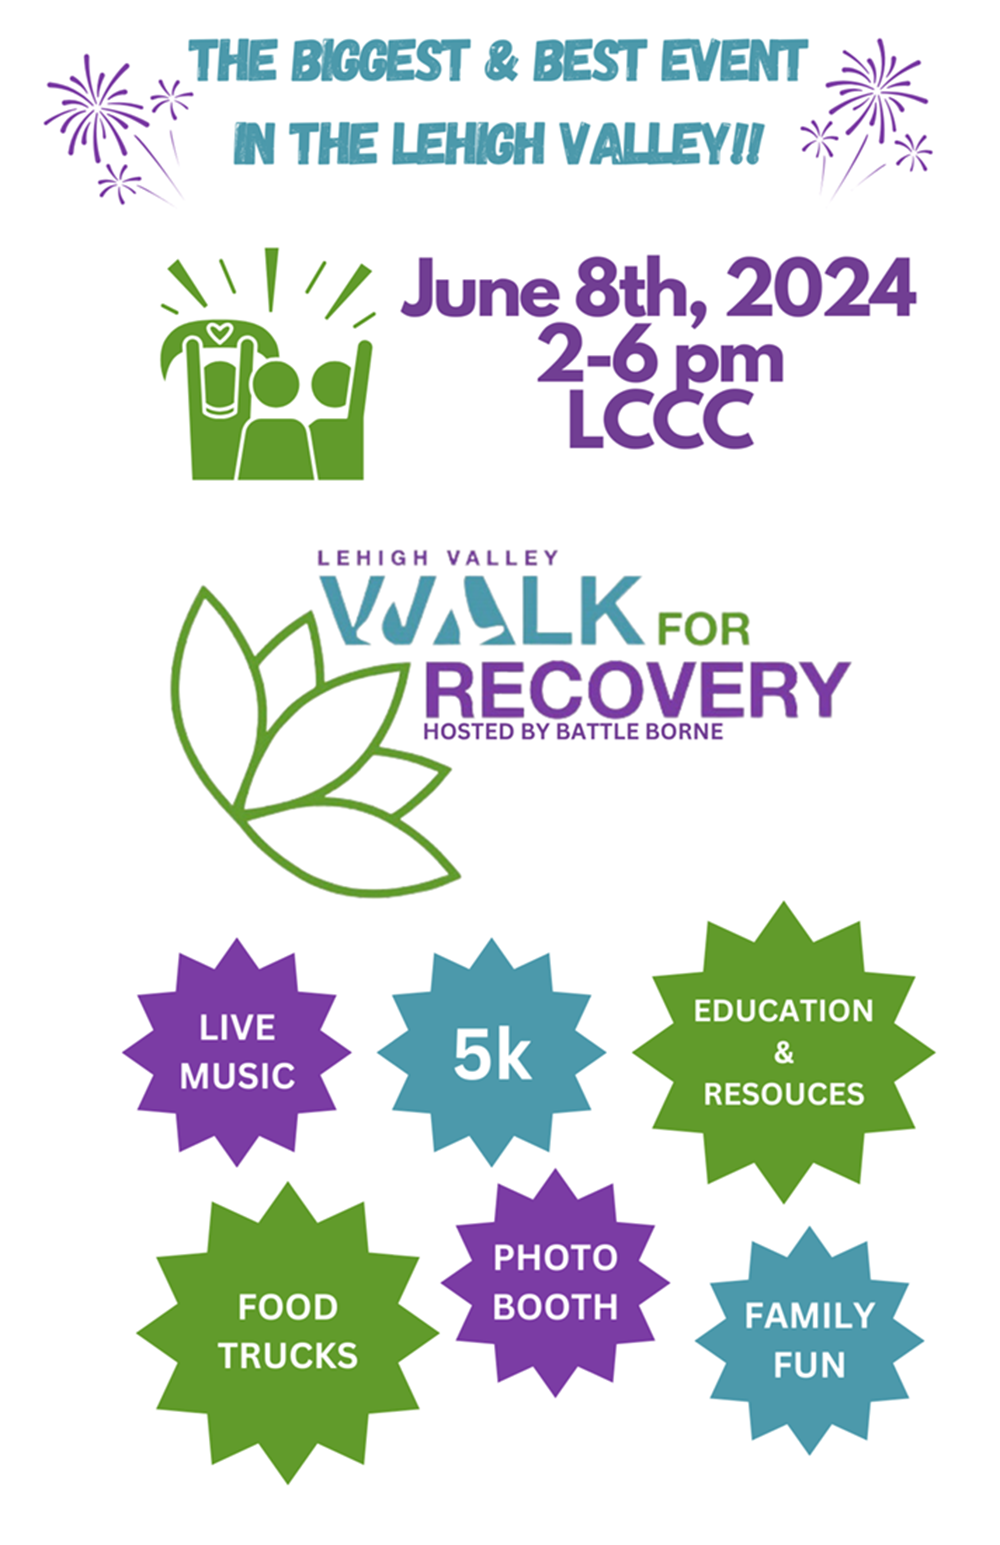 Lehigh Valley Walk for Recovery, hosted by Battle Borne. june 8th 2024 from 2-6pm